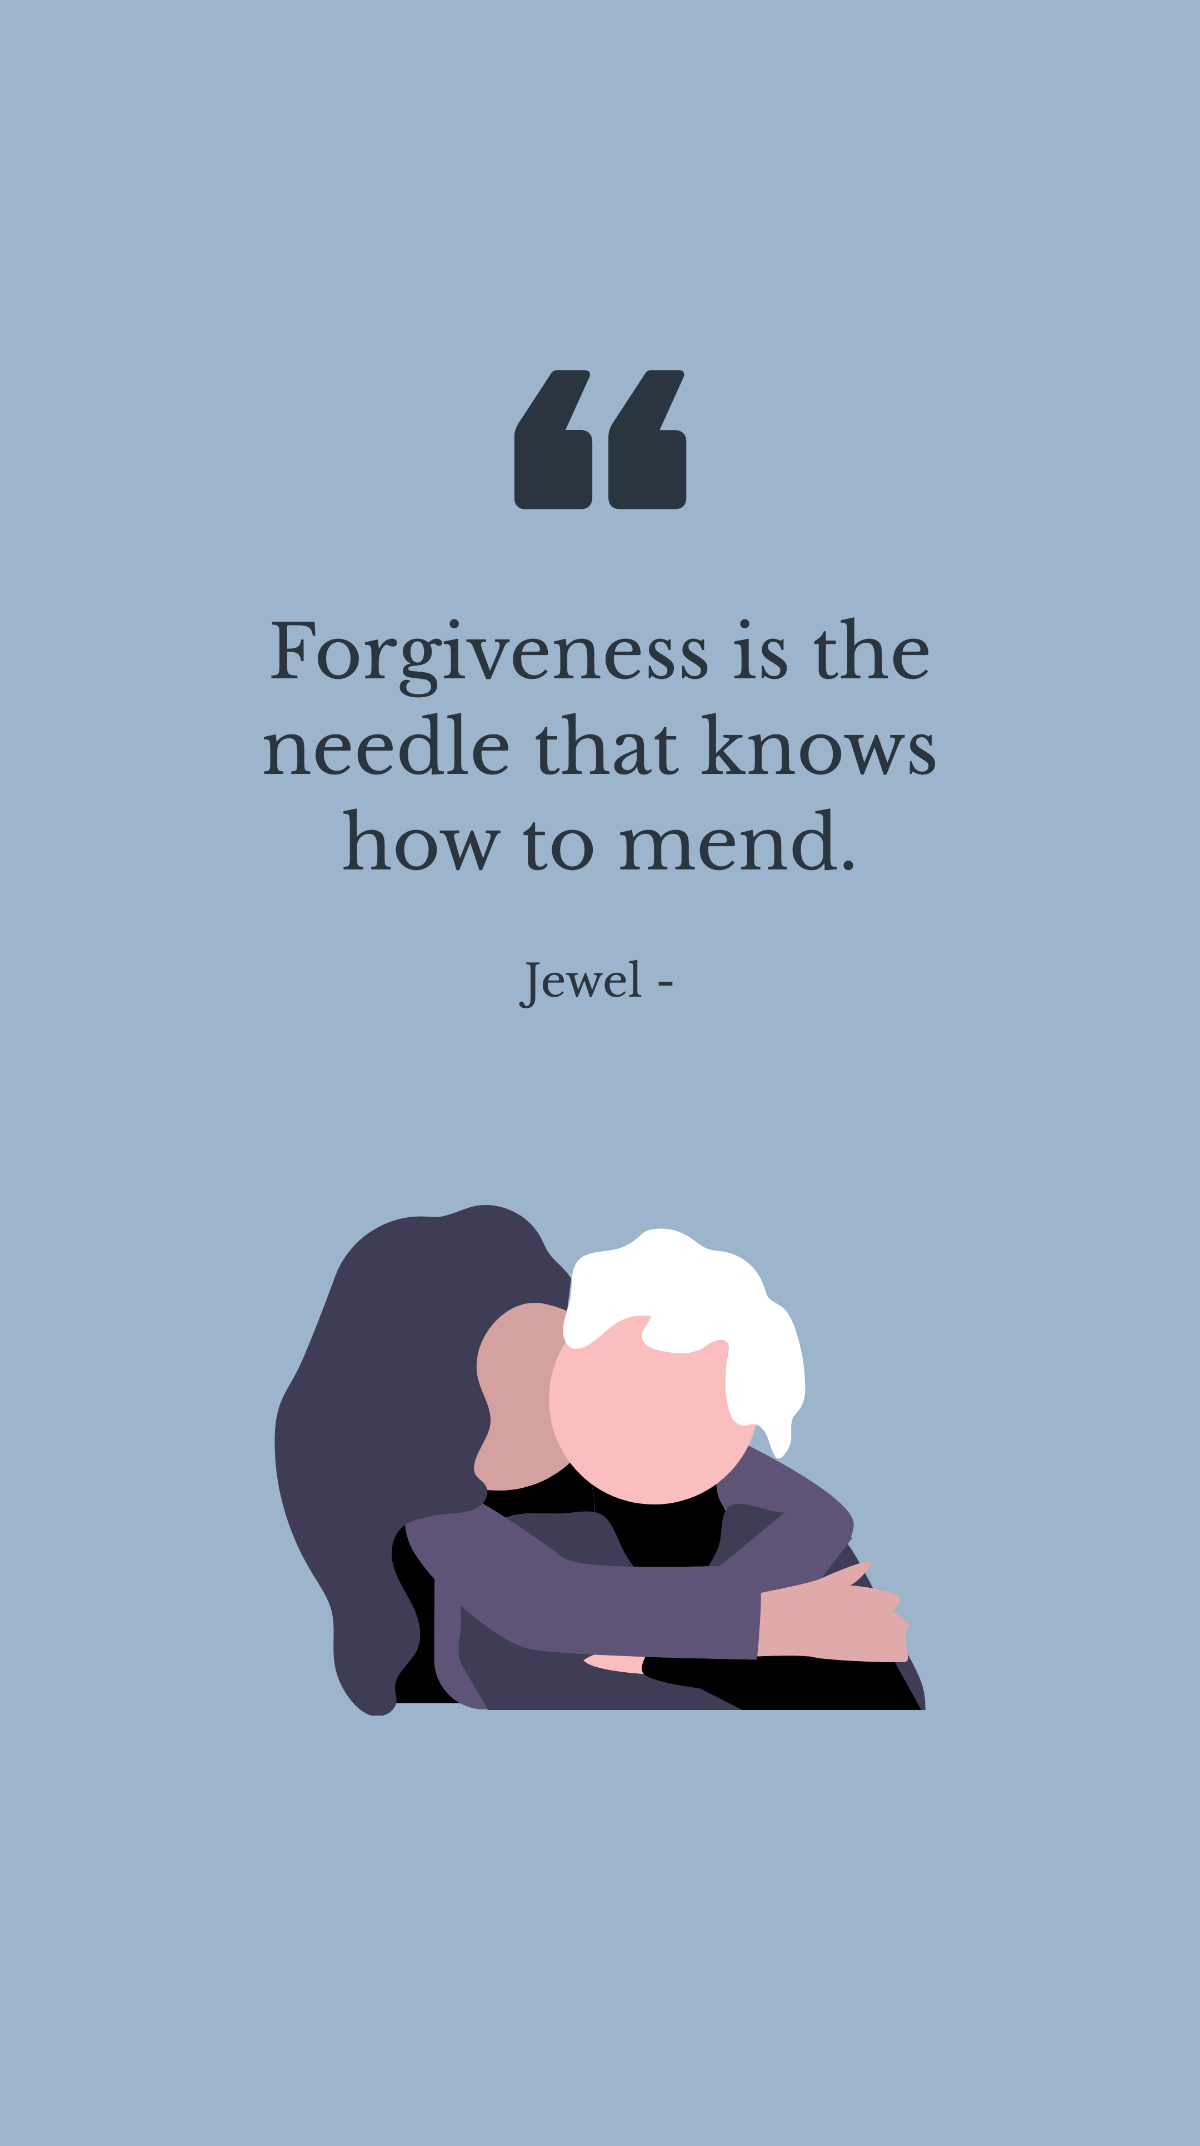 Jewel - Forgiveness is the needle that knows how to mend.